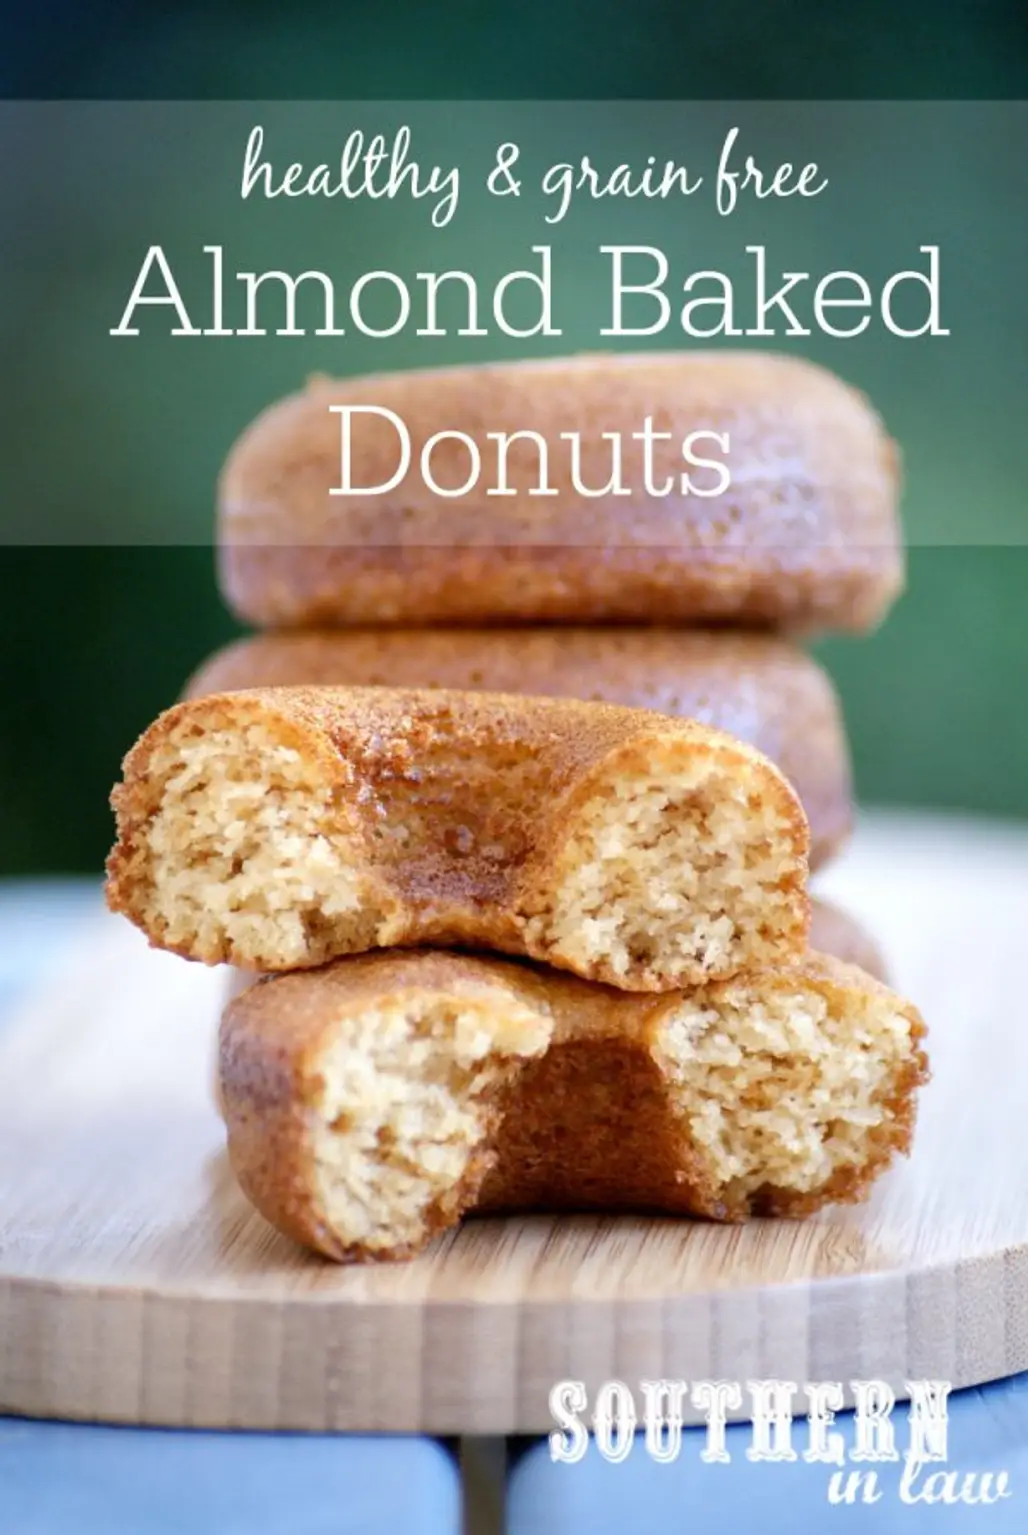 Almond Baked Donuts